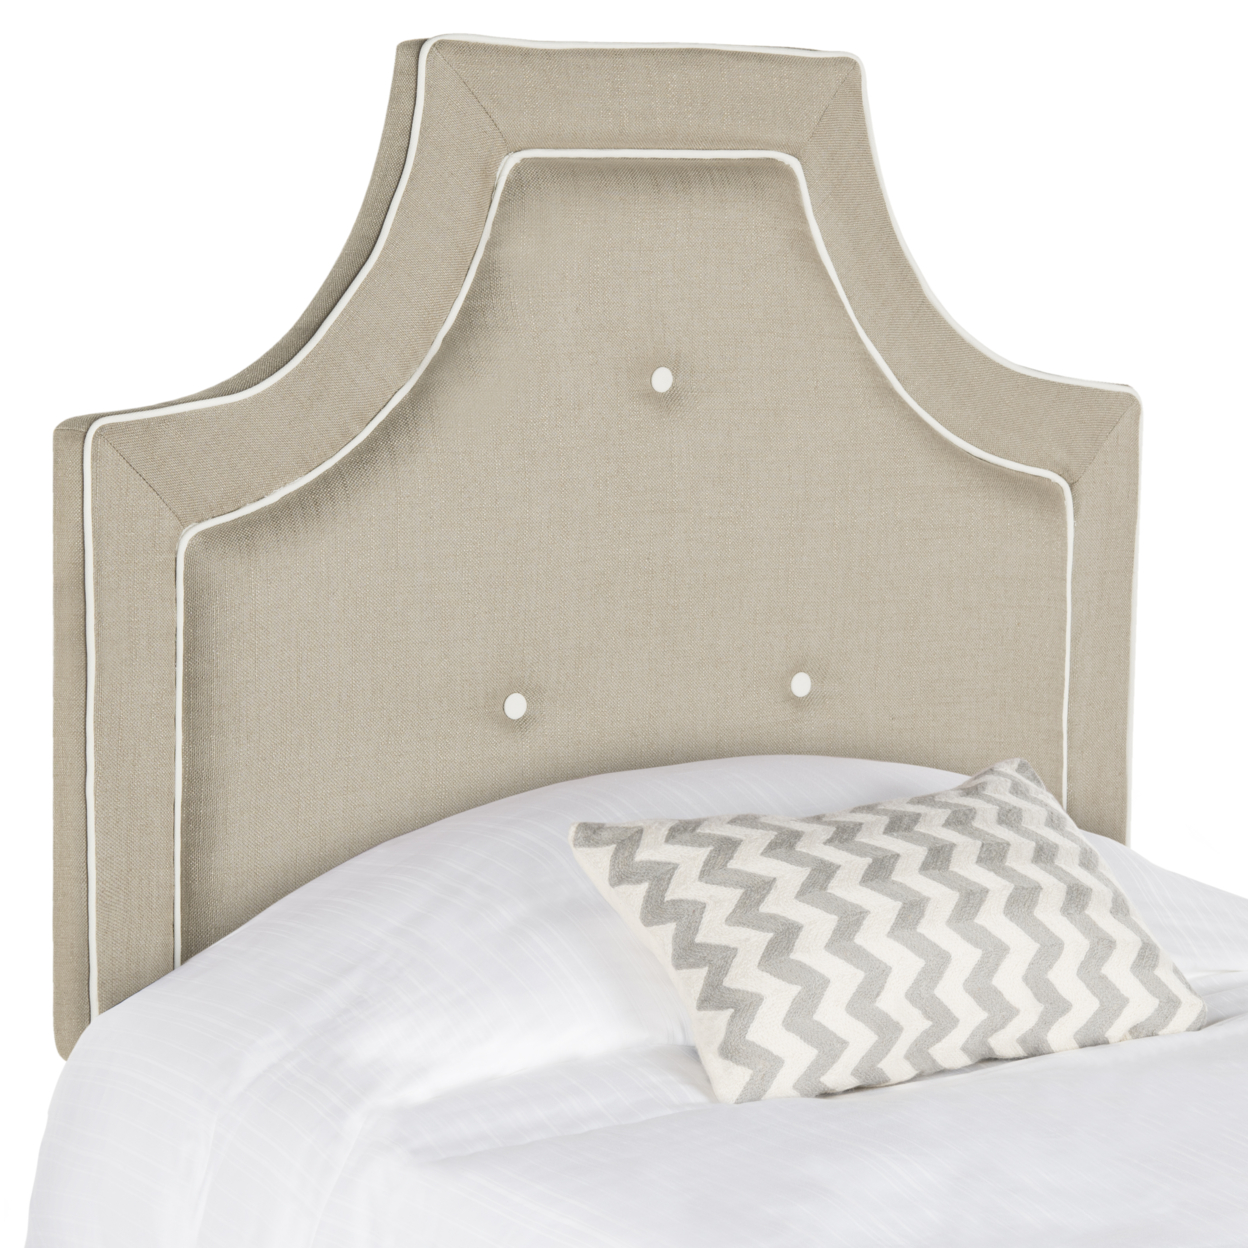 SAFAVIEH Tallulah Arched Headboard Light Oyster Grey / White King